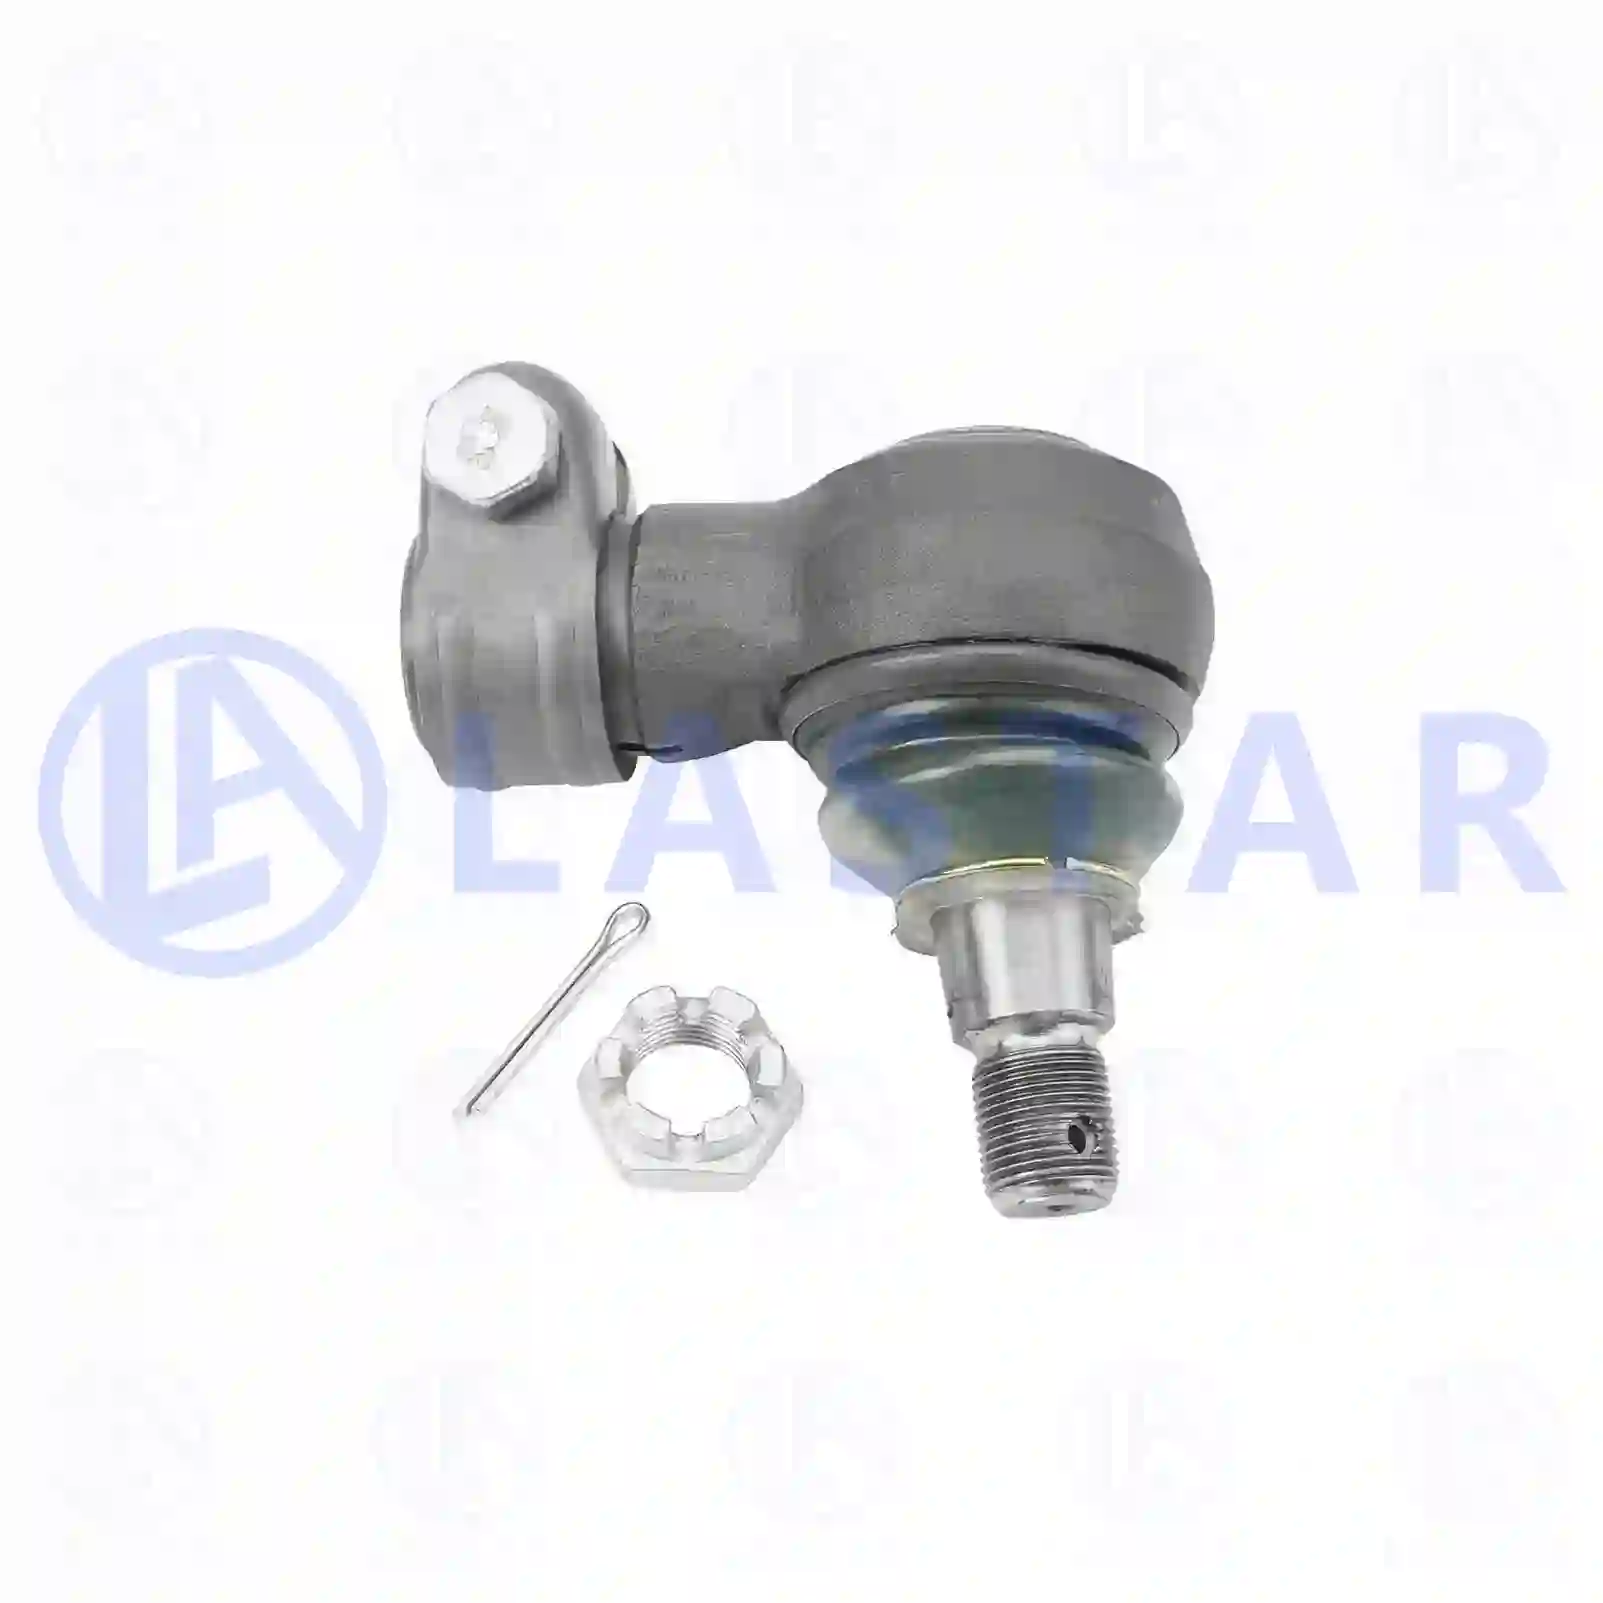 Ball joint, right hand thread, 77705114, 20374698, ZG40378-0008, , , ||  77705114 Lastar Spare Part | Truck Spare Parts, Auotomotive Spare Parts Ball joint, right hand thread, 77705114, 20374698, ZG40378-0008, , , ||  77705114 Lastar Spare Part | Truck Spare Parts, Auotomotive Spare Parts